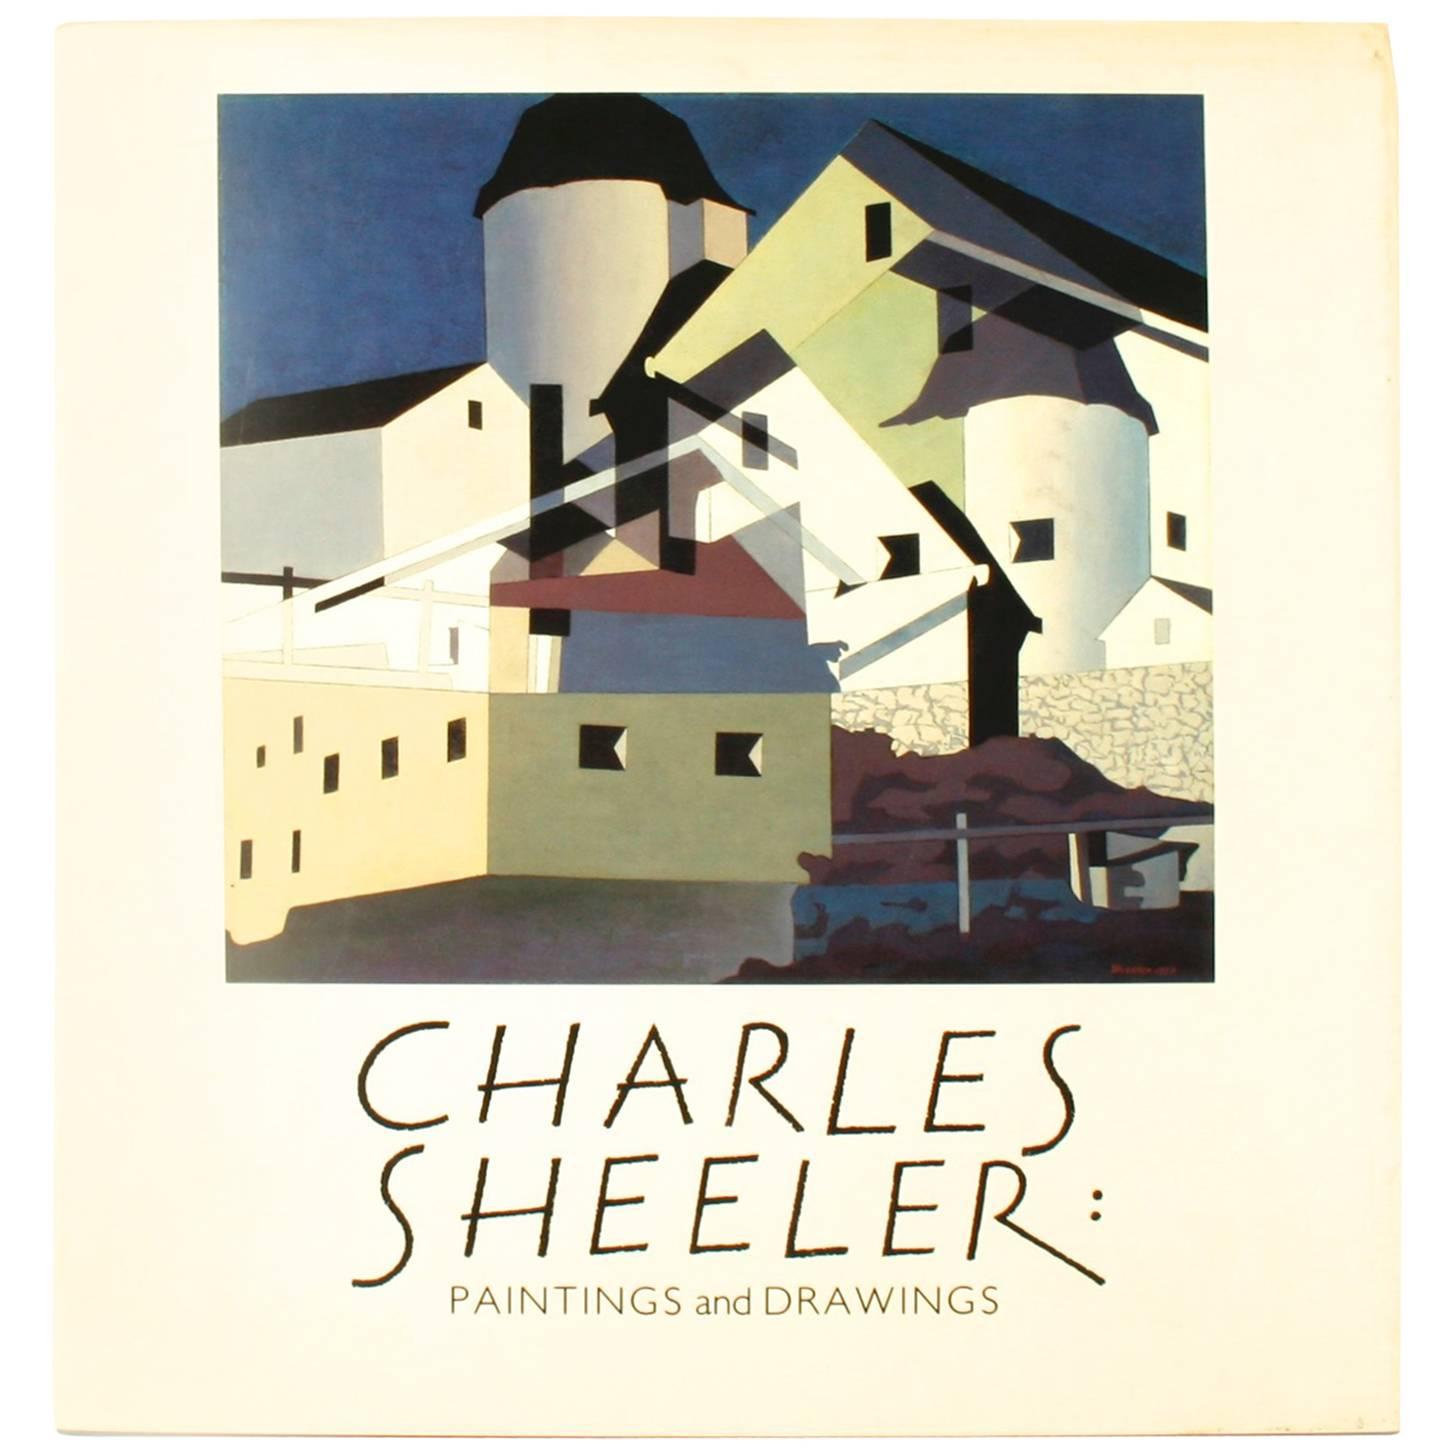 Charles Sheeler, Paintings and Drawings, First Edition